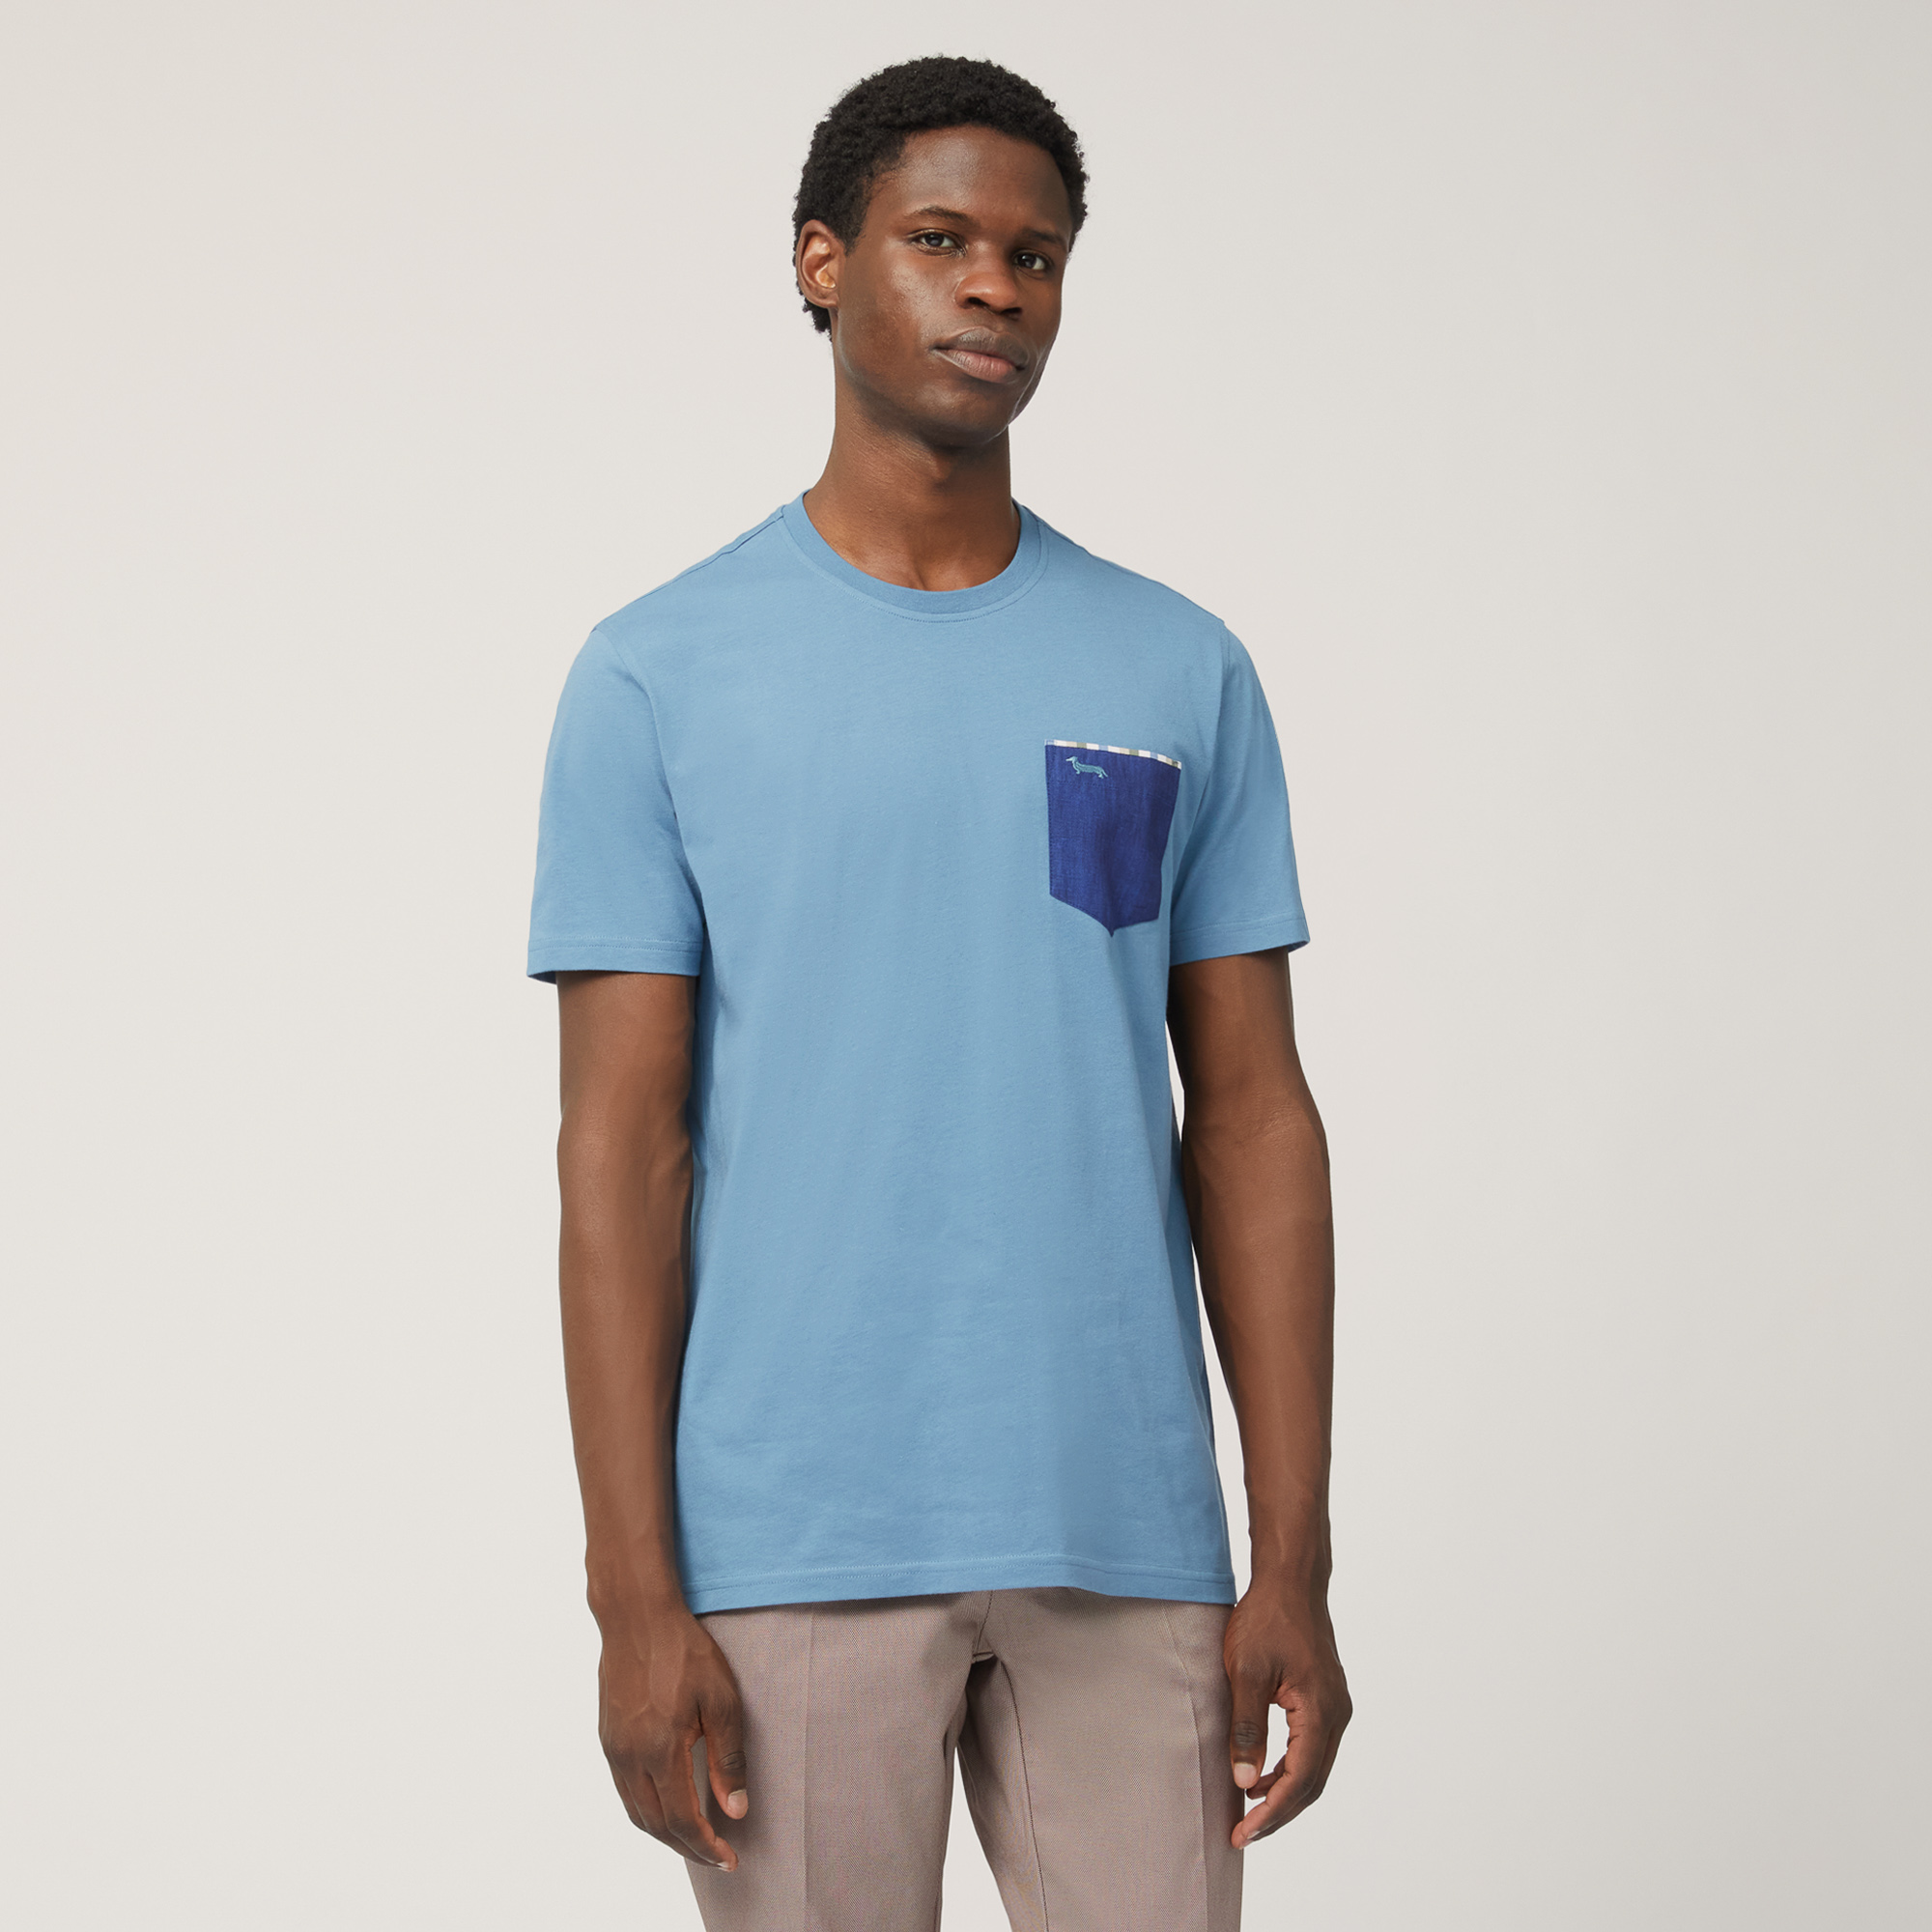 T-Shirt with Pocket, Blue, large